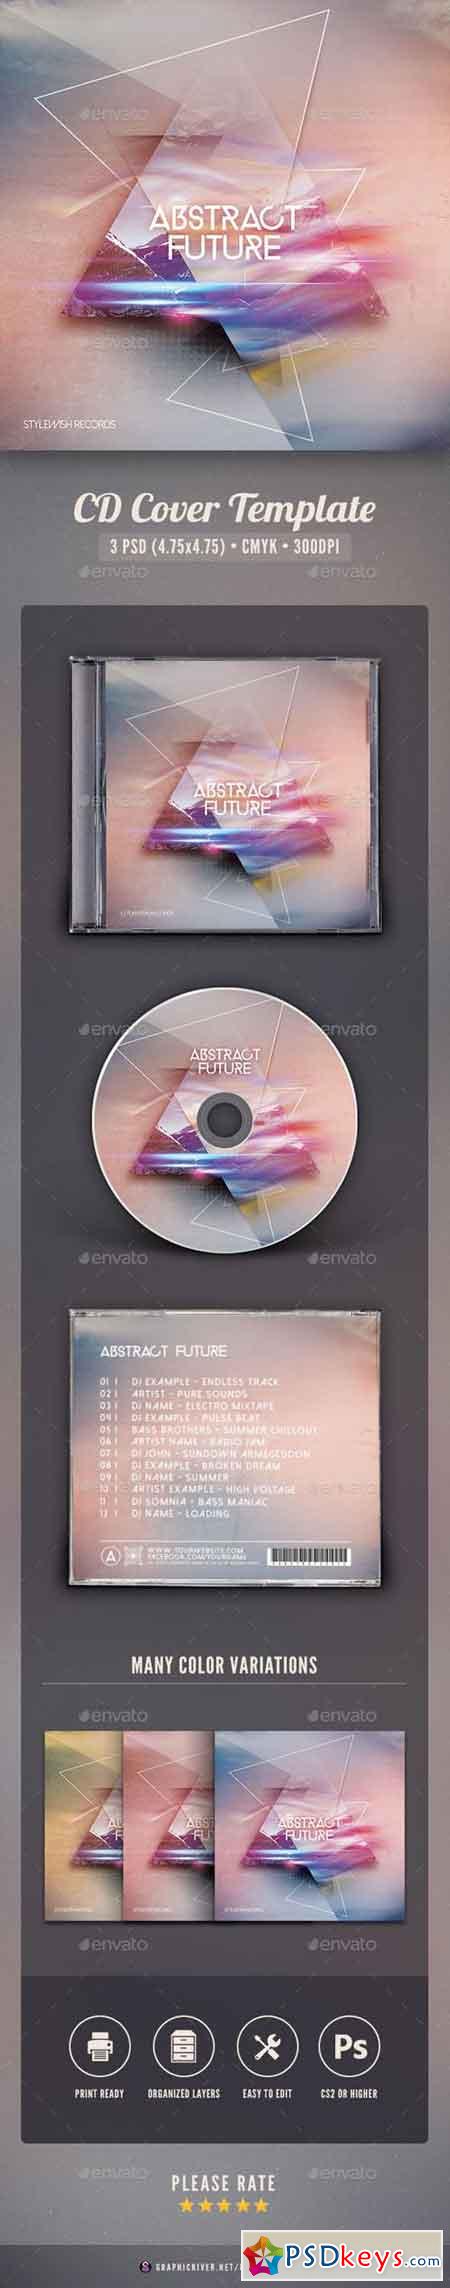 Abstract Future CD Cover Artwork 16150363